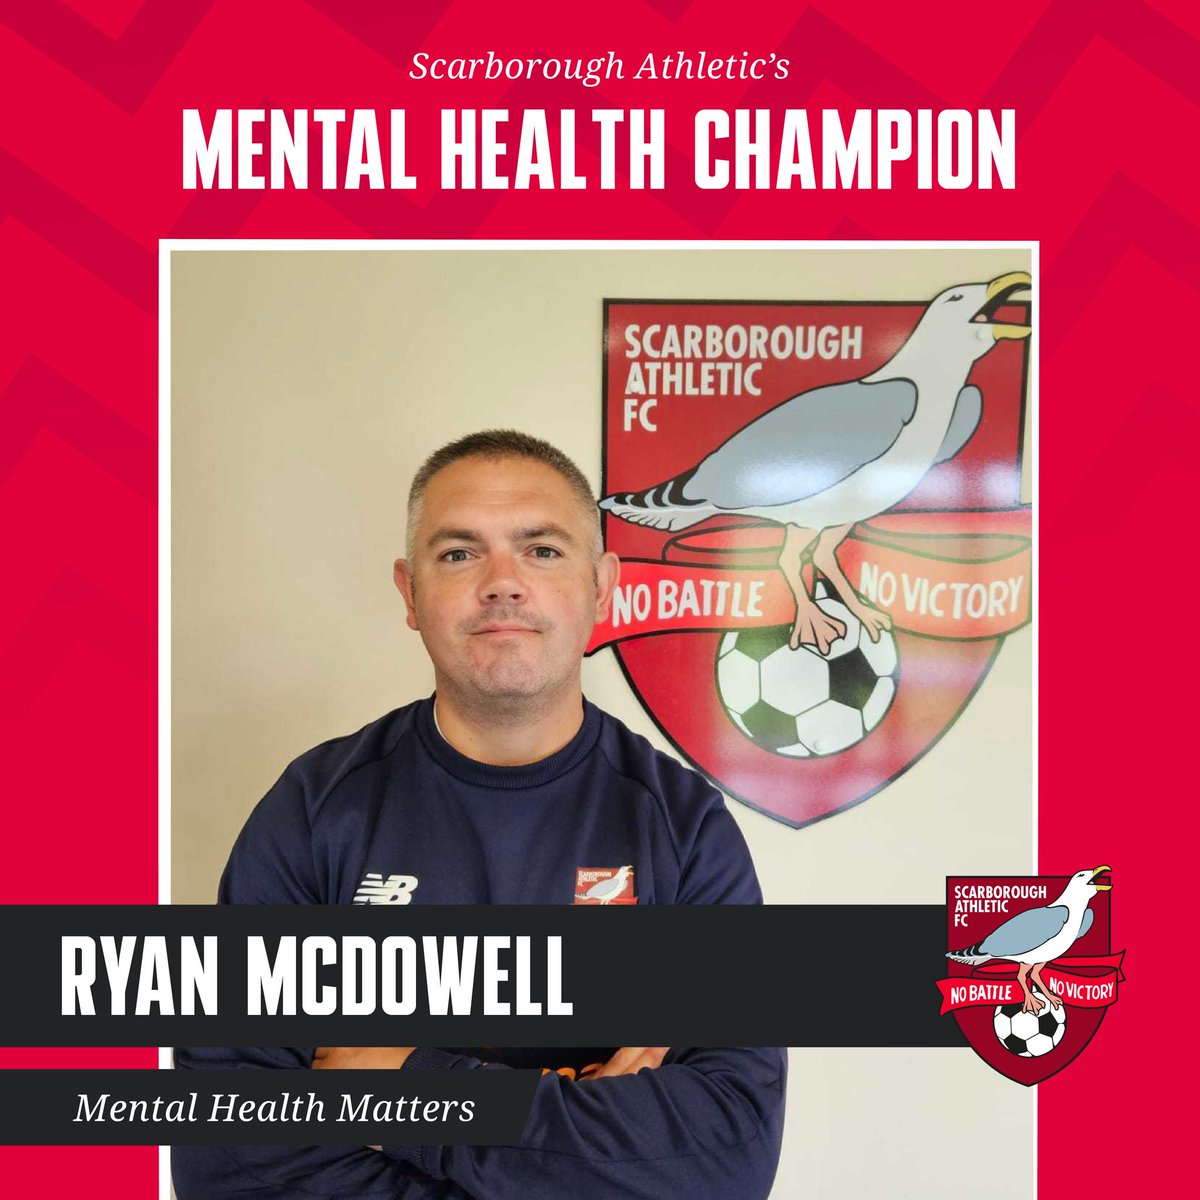 #MentalHealthAwarnessWeek Ryan, Assistant Head of Academy Operations, is the Club's Mental Health Champion. Working with the FMHA, we have a comprehensive Mental Health Plan, committed to prioritising mental health & well-being. More info: loom.ly/SNXg1NM